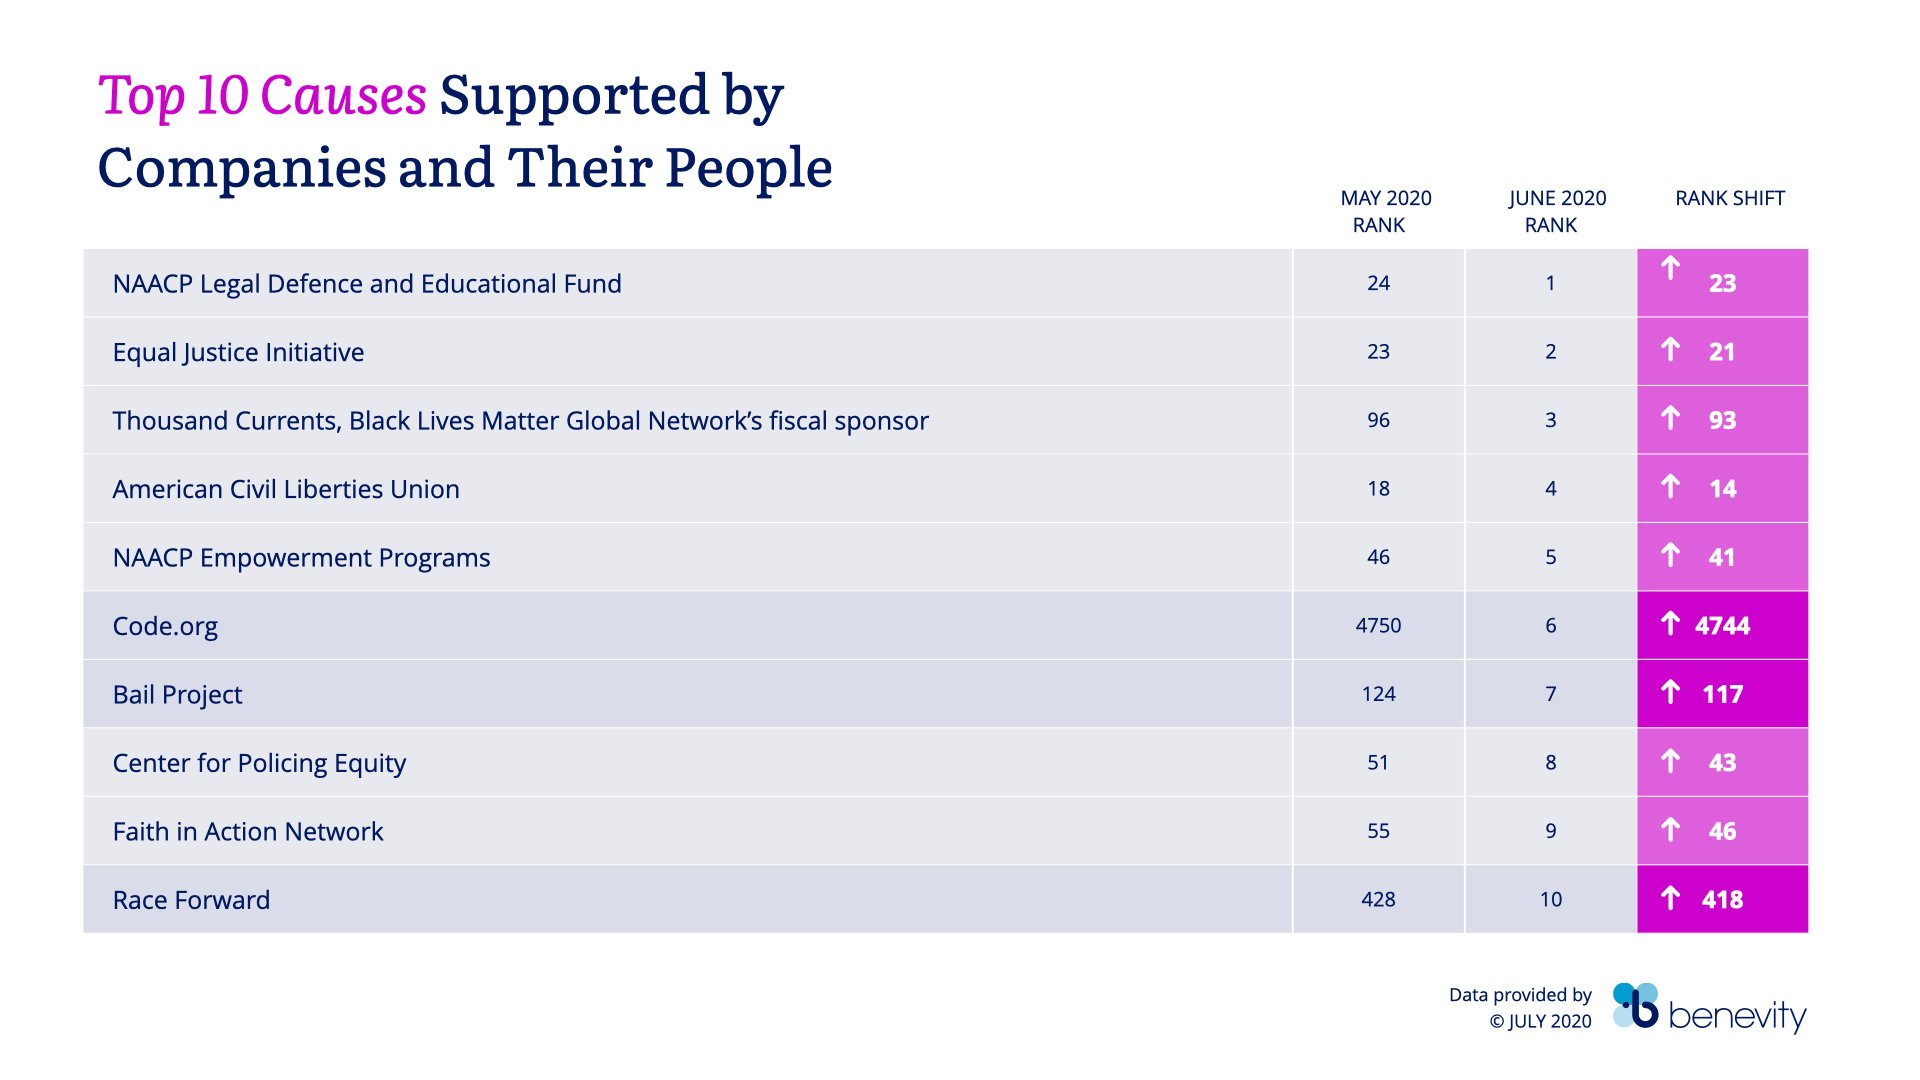 Top Causes Supported by Companies and Their People